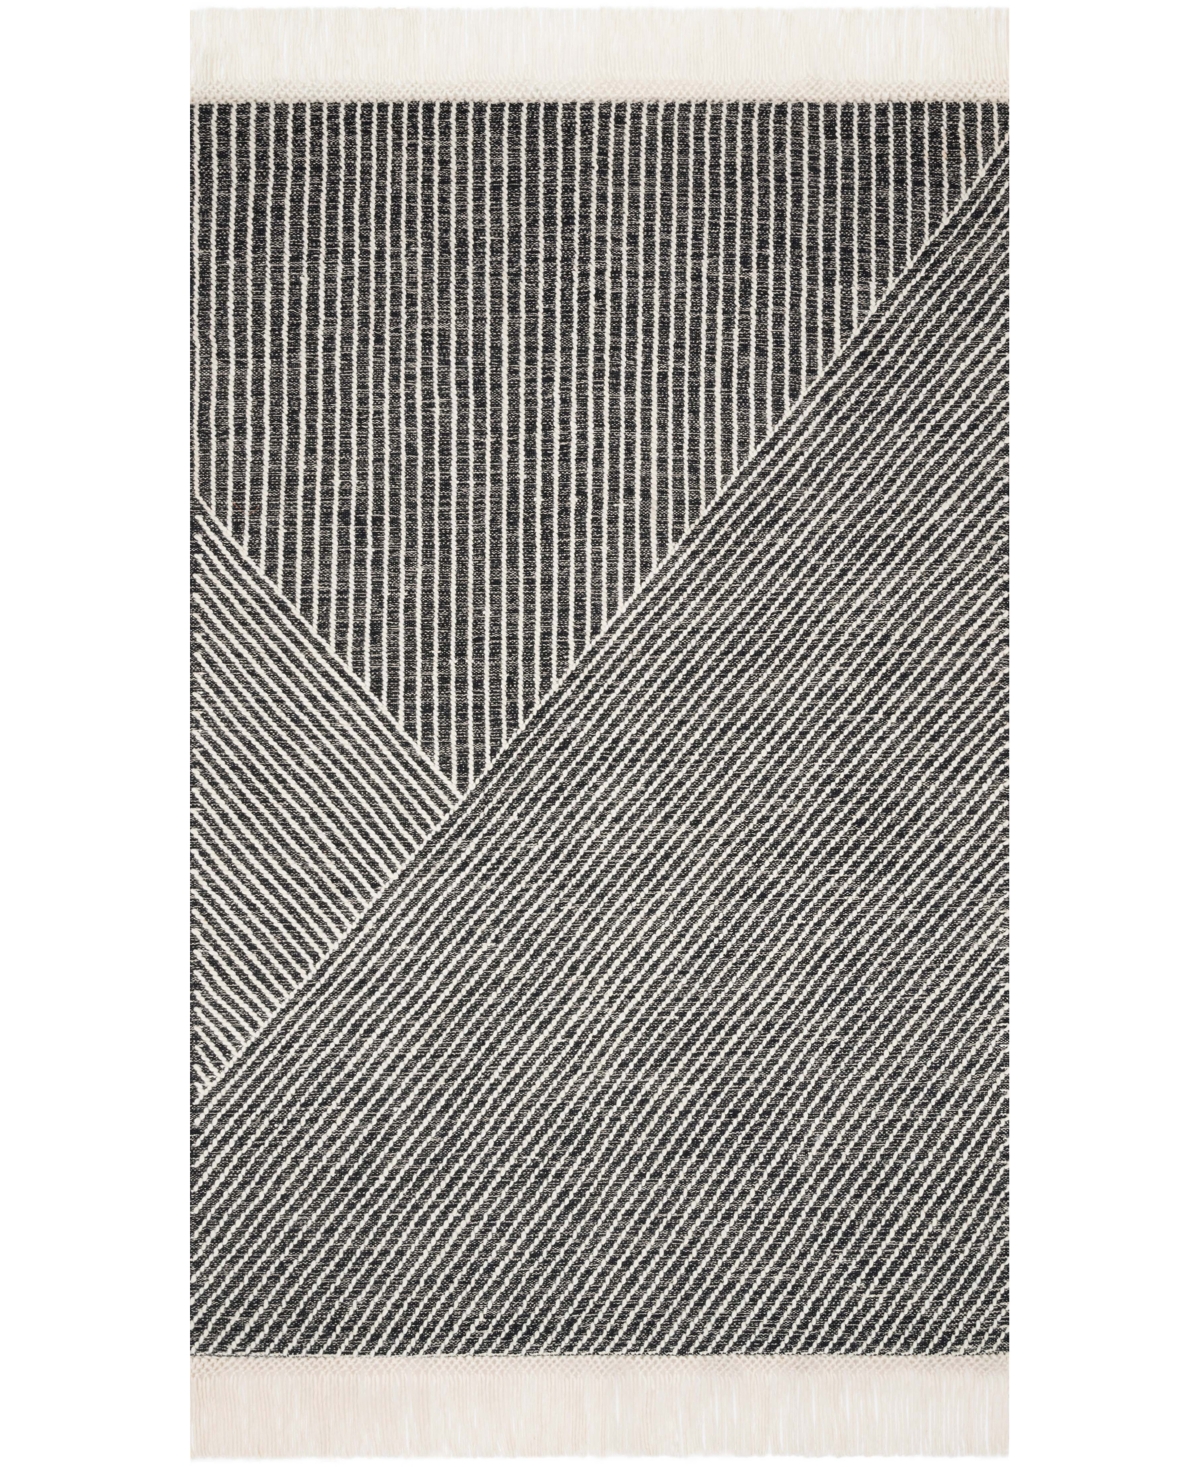 Magnolia Home By Joanna Gaines X Loloi Newton Net-01 7'9" X 9'9" Area Rug In Charcoal